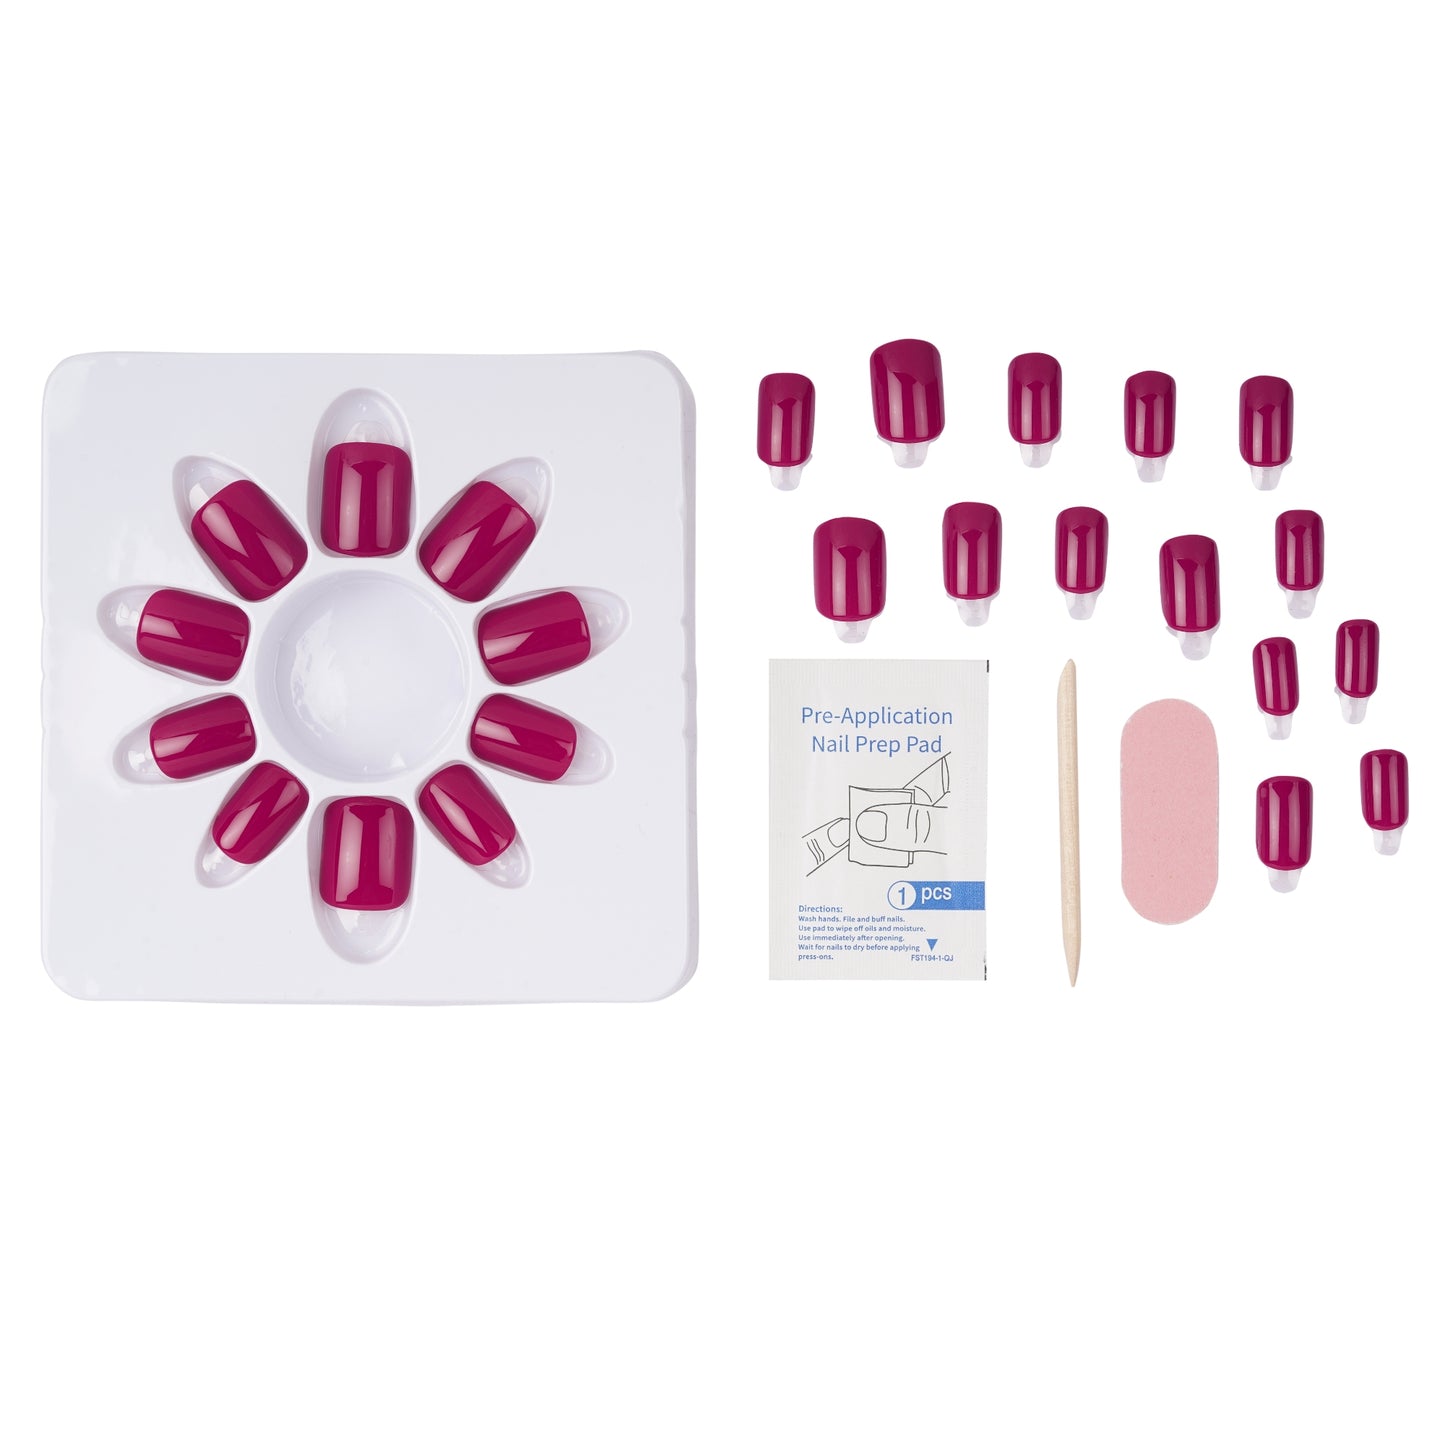 Stick On Nails | Brick Red Artificial Reusable Press on Nails With Quick Dry Nail Glue